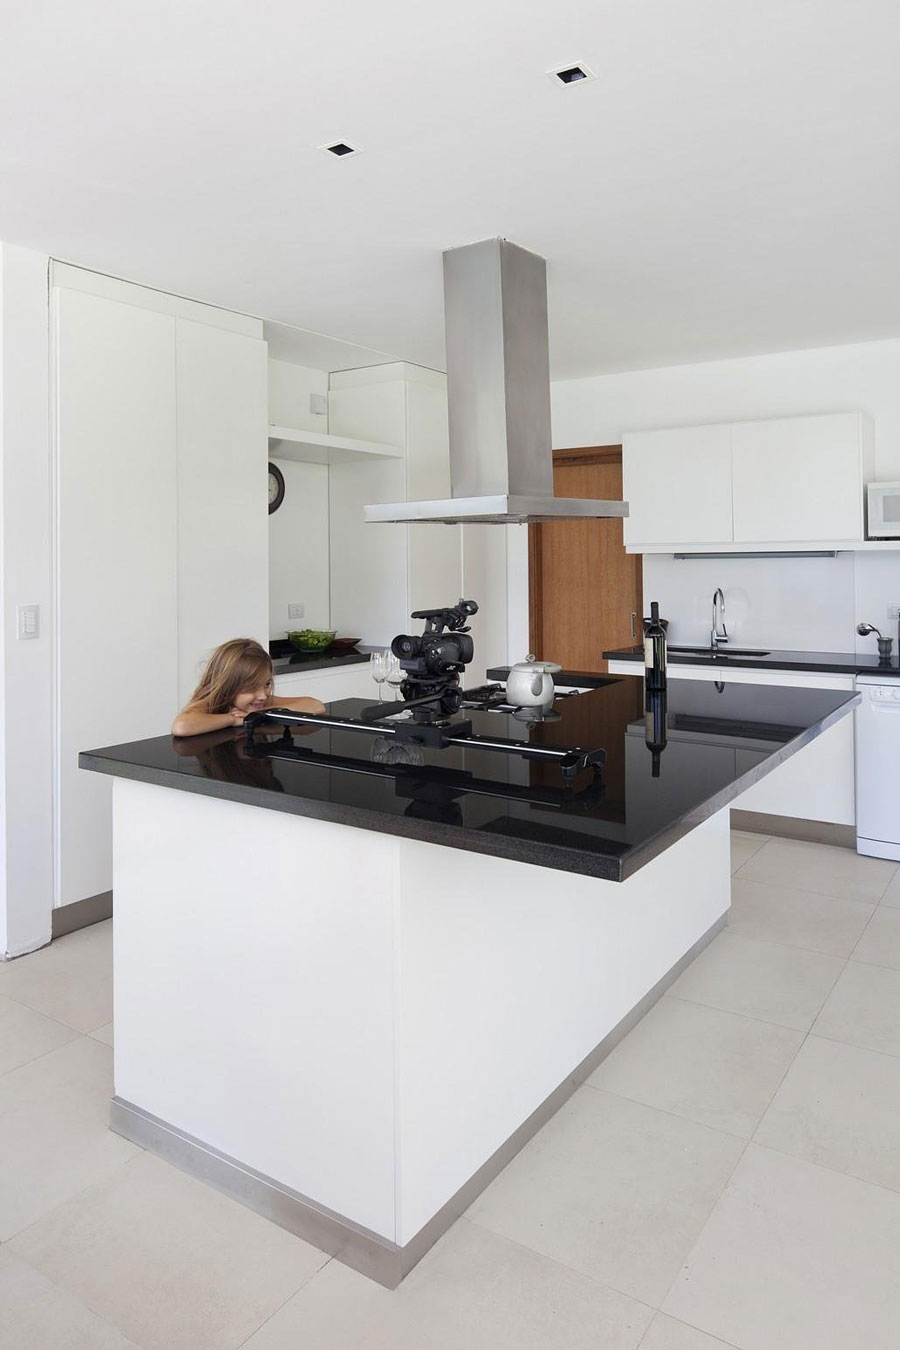 Kitchen Design Bell Breathtaking Kitchen Design Of Grand Bell Residence With White Kitchen Island With Black Colored Surface Made From Marble Dream Homes Fresh White Home Shades Of Clean And Airy Interior Ideas